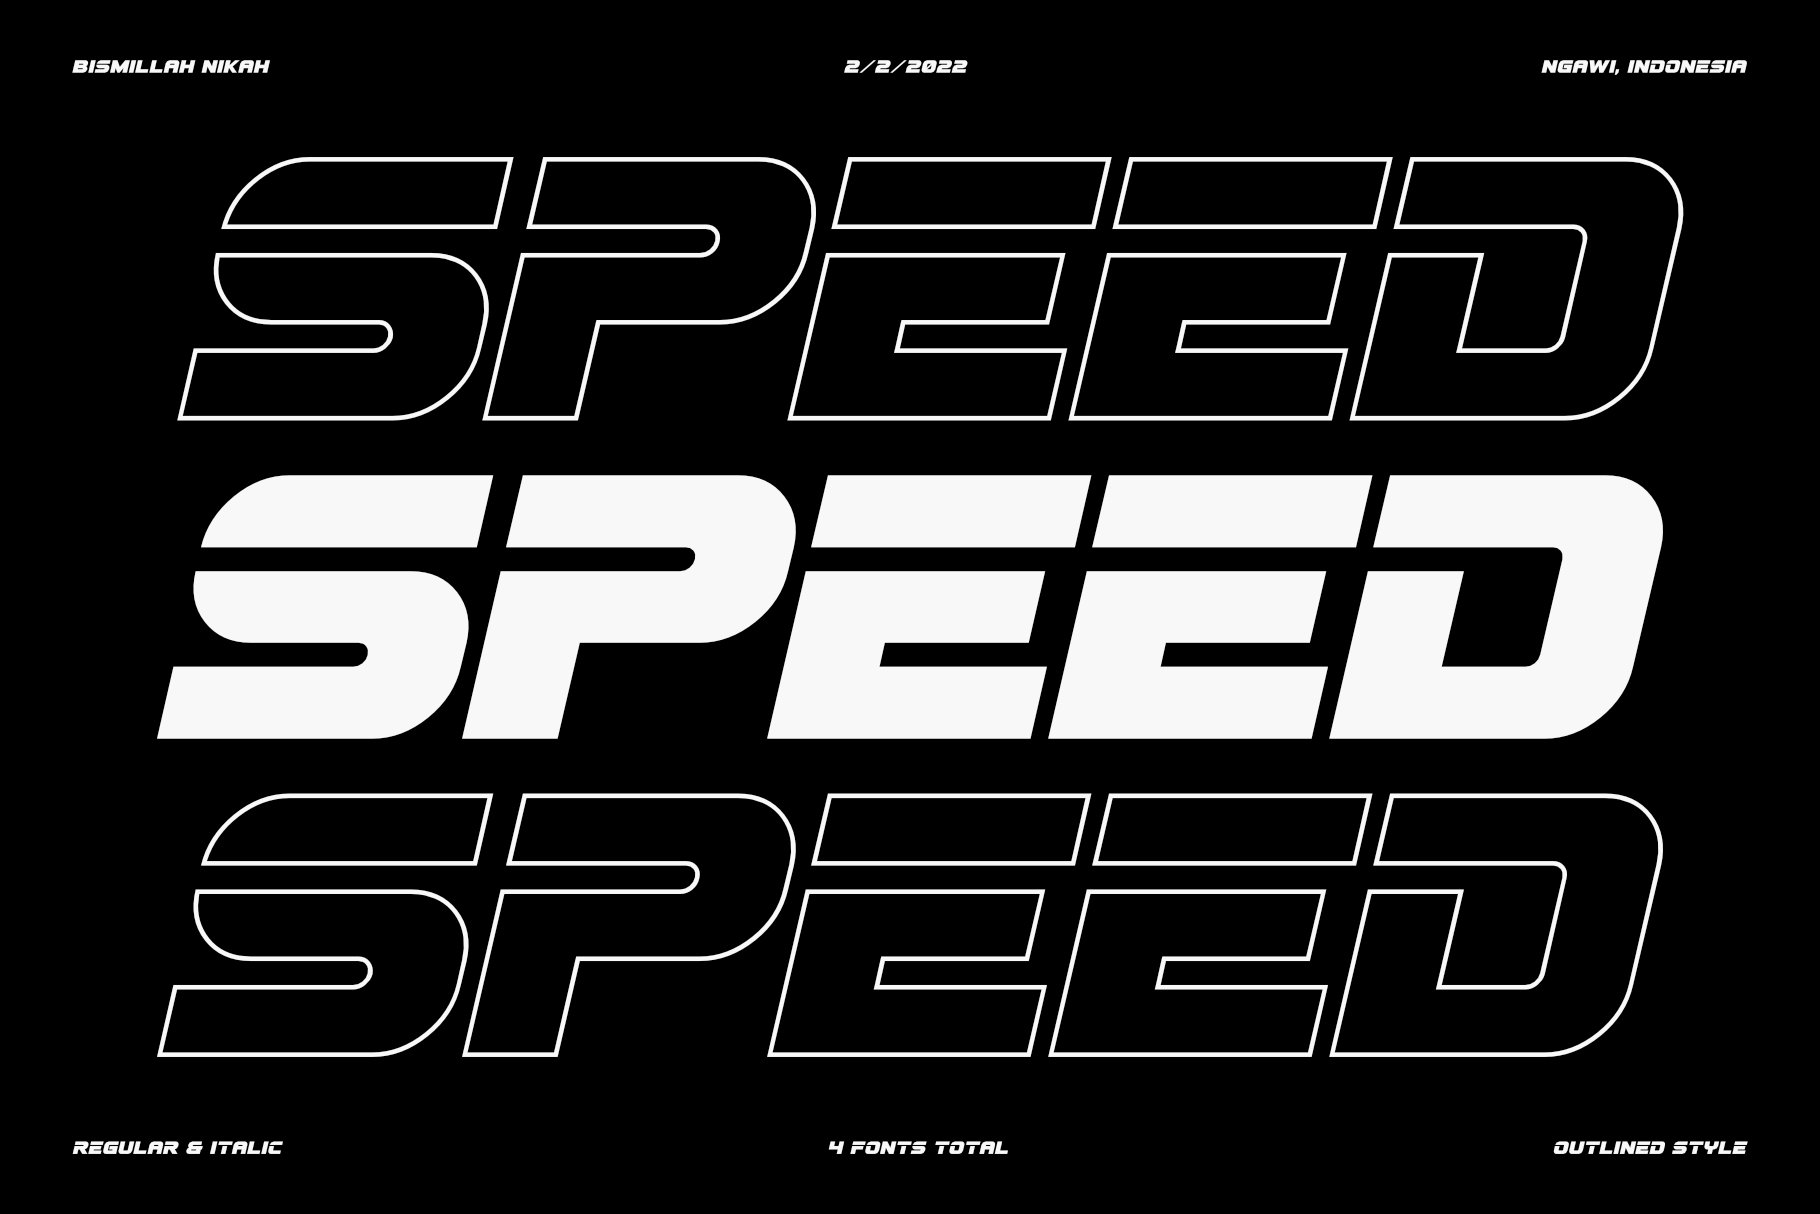 SPEED FEZ FONT cover image.